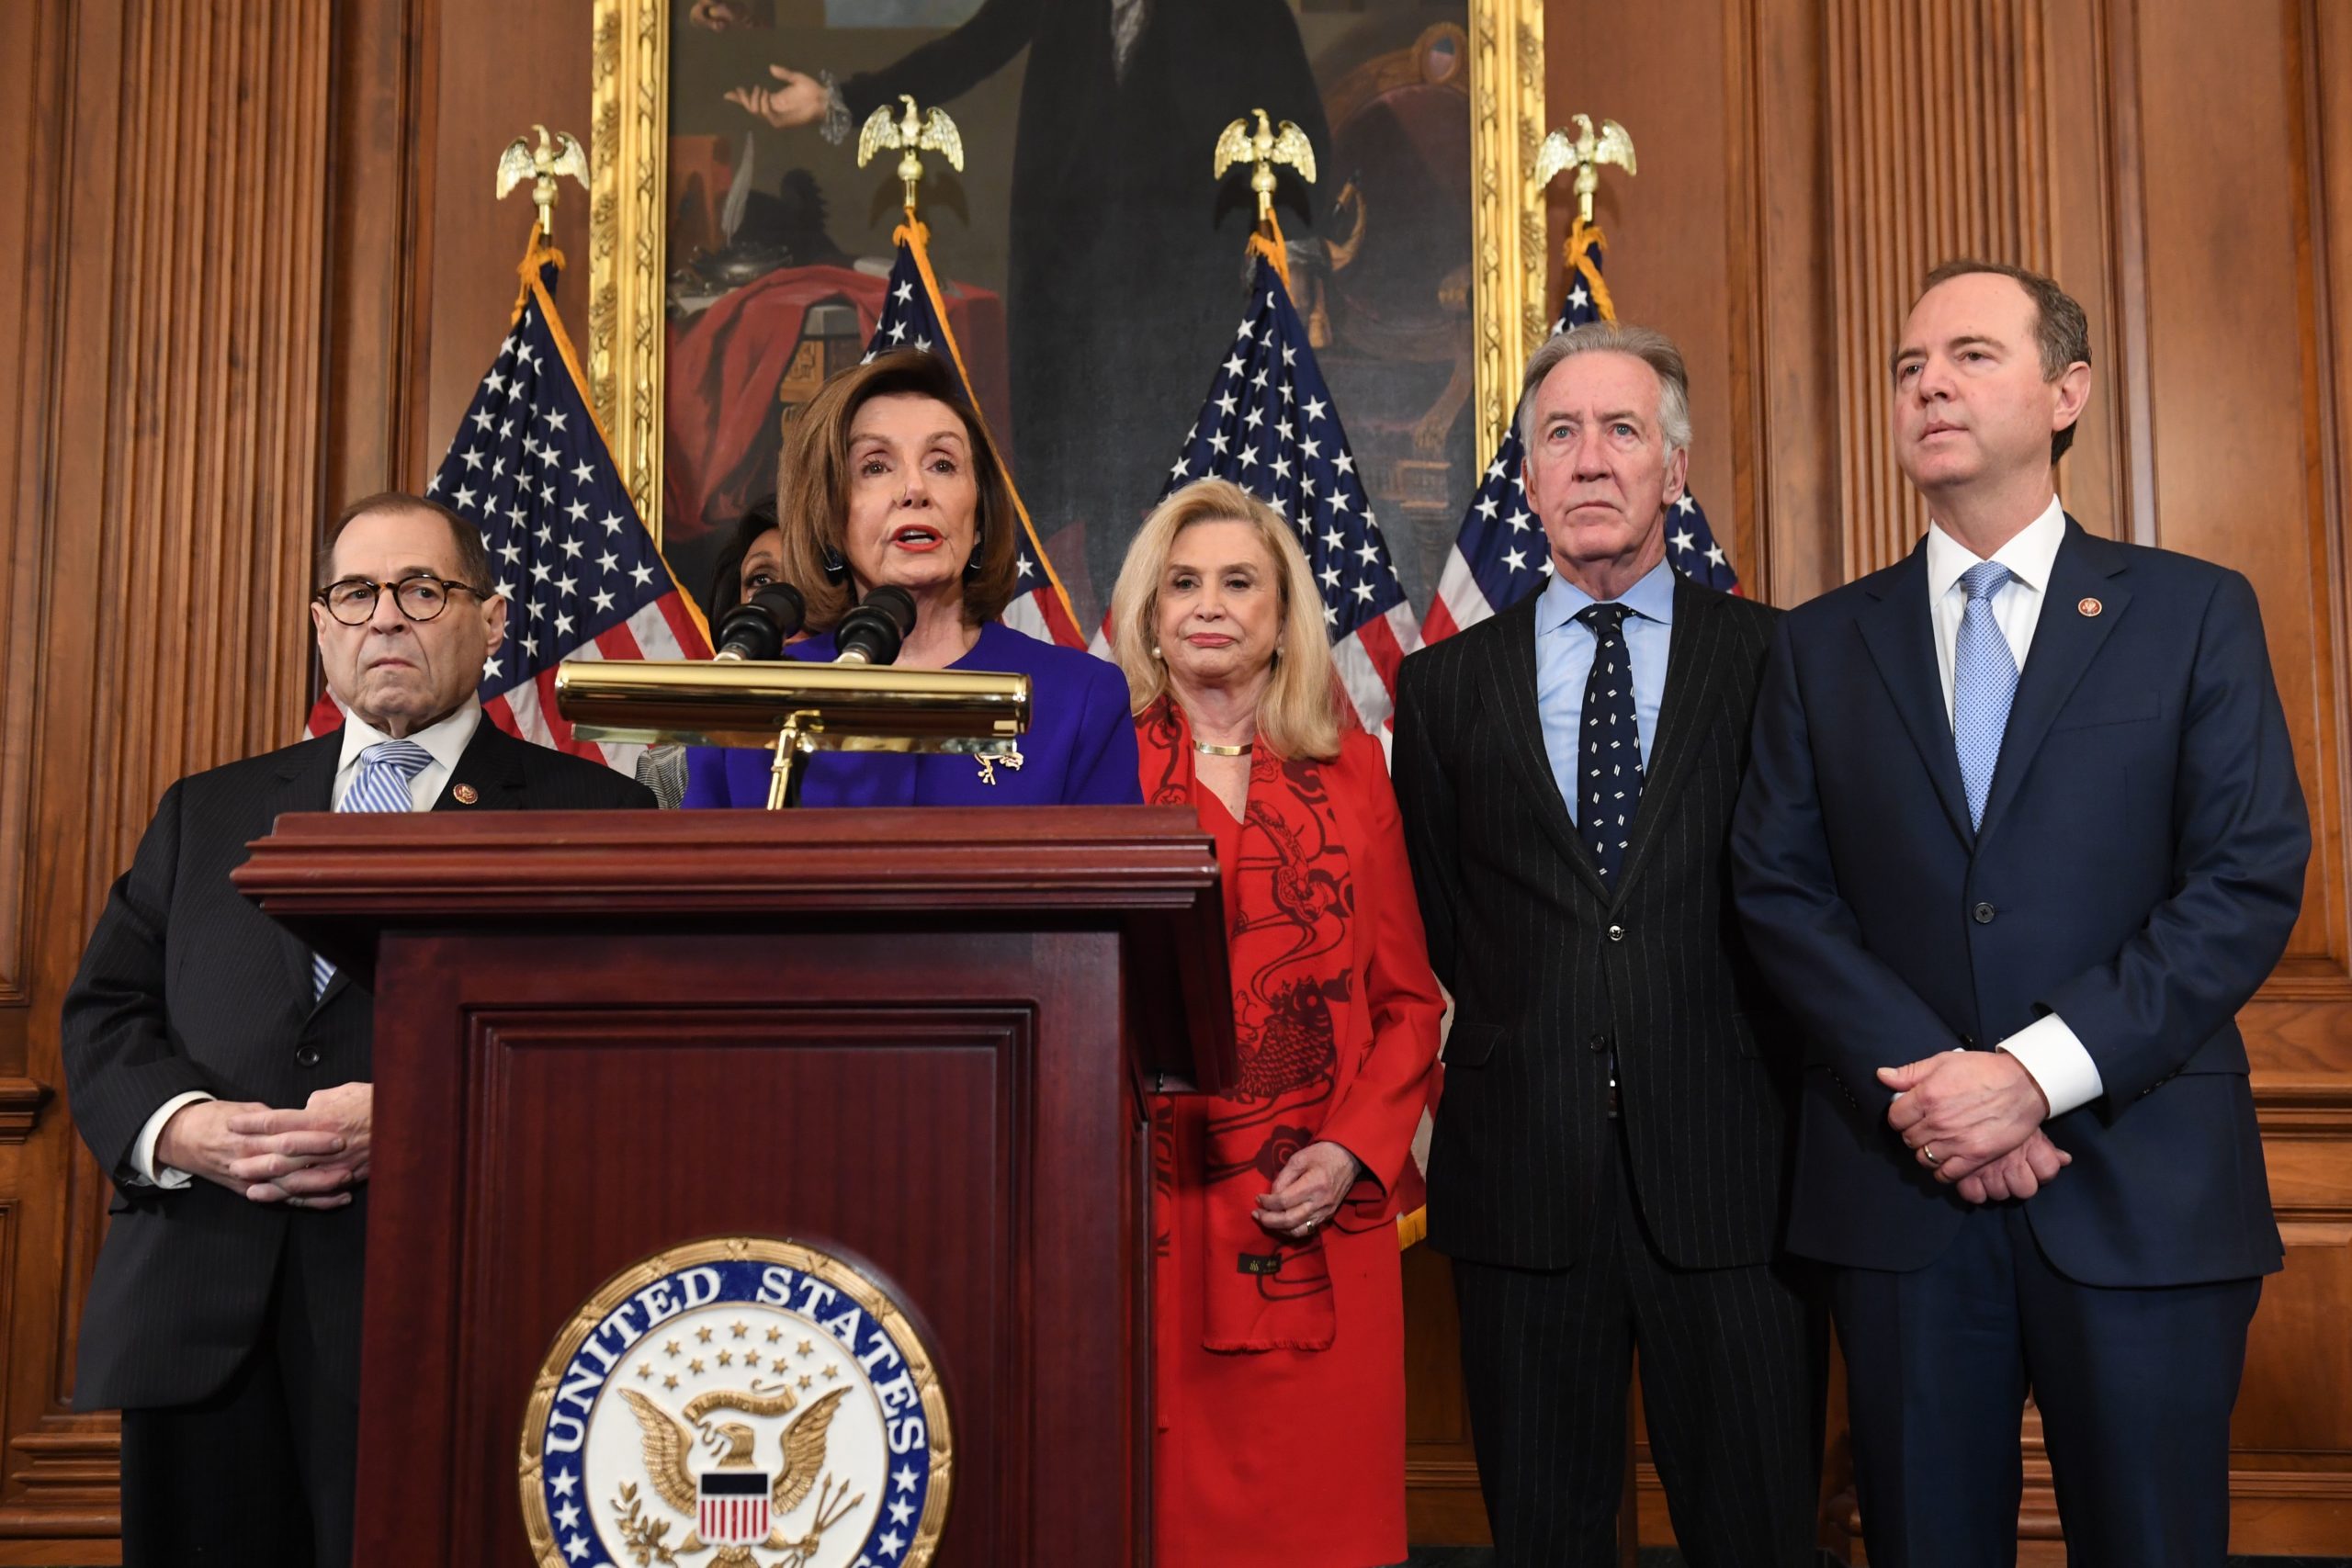 Speaker of the House Nancy Pelosi (C), flanked by House Permanent Select Committee on Intelligence Chairman Adam Schiff (R)(D-CA), House Judiciary Chairman Jerry Nadler (L) (D-NY), House Foreign Affairs Committee Chairman Eliot Engel (2ndR) (D-NY), House Financial Services Committee Chairwoman Maxine Waters (background)(D-CA), and House Committee on Oversight and Reform Chairwoman Carolyn Maloney (2nd R) (D-NY), speaks as Democrats announced articles of impeachment against US President Donald Trump during a press conference at the US Capitol in Washington, DC, December 10, 2019 listing abuse of power and obstruction of Congress. (Photo by SAUL LOEB / AFP) (Photo by SAUL LOEB/AFP via Getty Images)